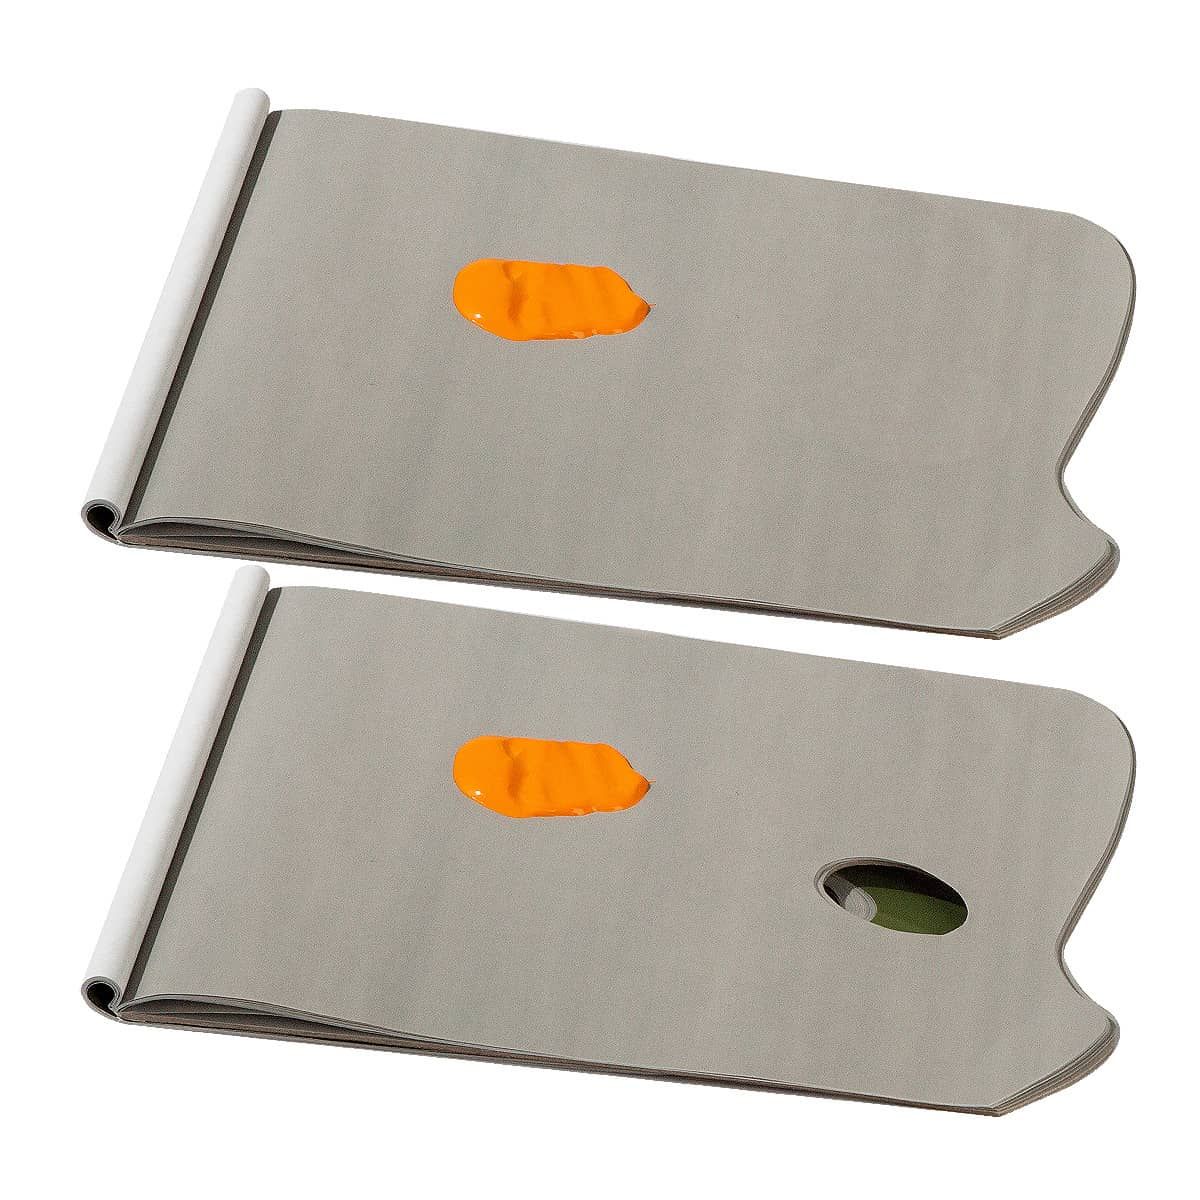 Available as a rectangular-shaped pad or pad featuring a thumb hole